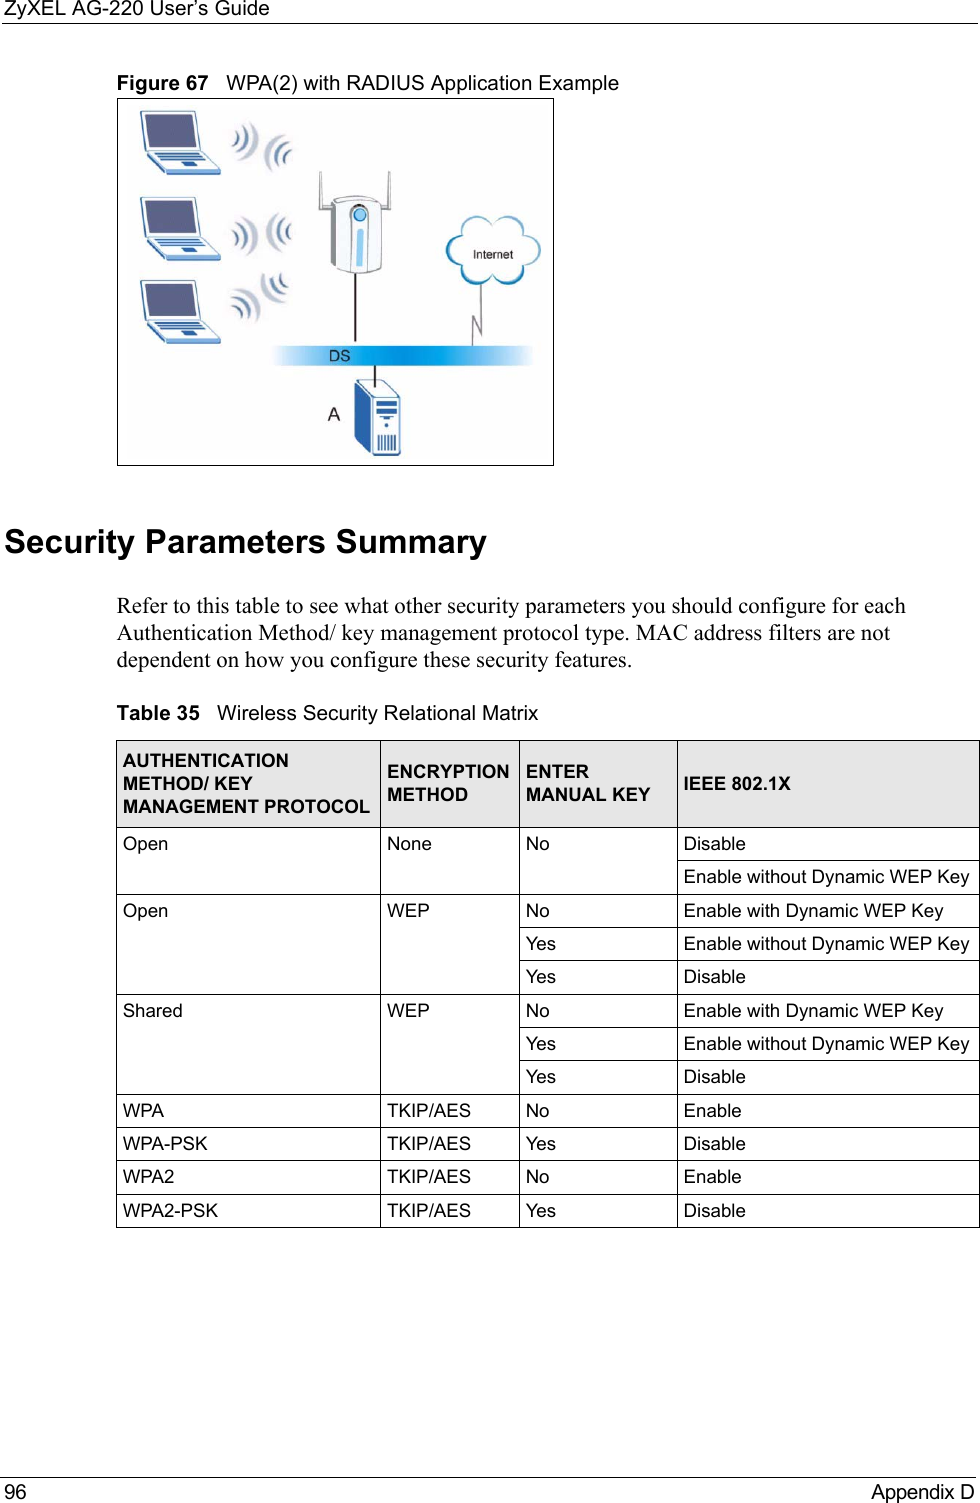 ZyXEL AG-220 User’s Guide96 Appendix DFigure 67   WPA(2) with RADIUS Application ExampleSecurity Parameters SummaryRefer to this table to see what other security parameters you should configure for each Authentication Method/ key management protocol type. MAC address filters are not dependent on how you configure these security features.Table 35   Wireless Security Relational MatrixAUTHENTICATION METHOD/ KEY MANAGEMENT PROTOCOLENCRYPTION METHODENTER MANUAL KEY IEEE 802.1XOpen None No DisableEnable without Dynamic WEP KeyOpen WEP No           Enable with Dynamic WEP KeyYes Enable without Dynamic WEP KeyYes DisableShared WEP  No           Enable with Dynamic WEP KeyYes Enable without Dynamic WEP KeyYes DisableWPA  TKIP/AES No EnableWPA-PSK  TKIP/AES Yes DisableWPA2 TKIP/AES No EnableWPA2-PSK  TKIP/AES Yes Disable